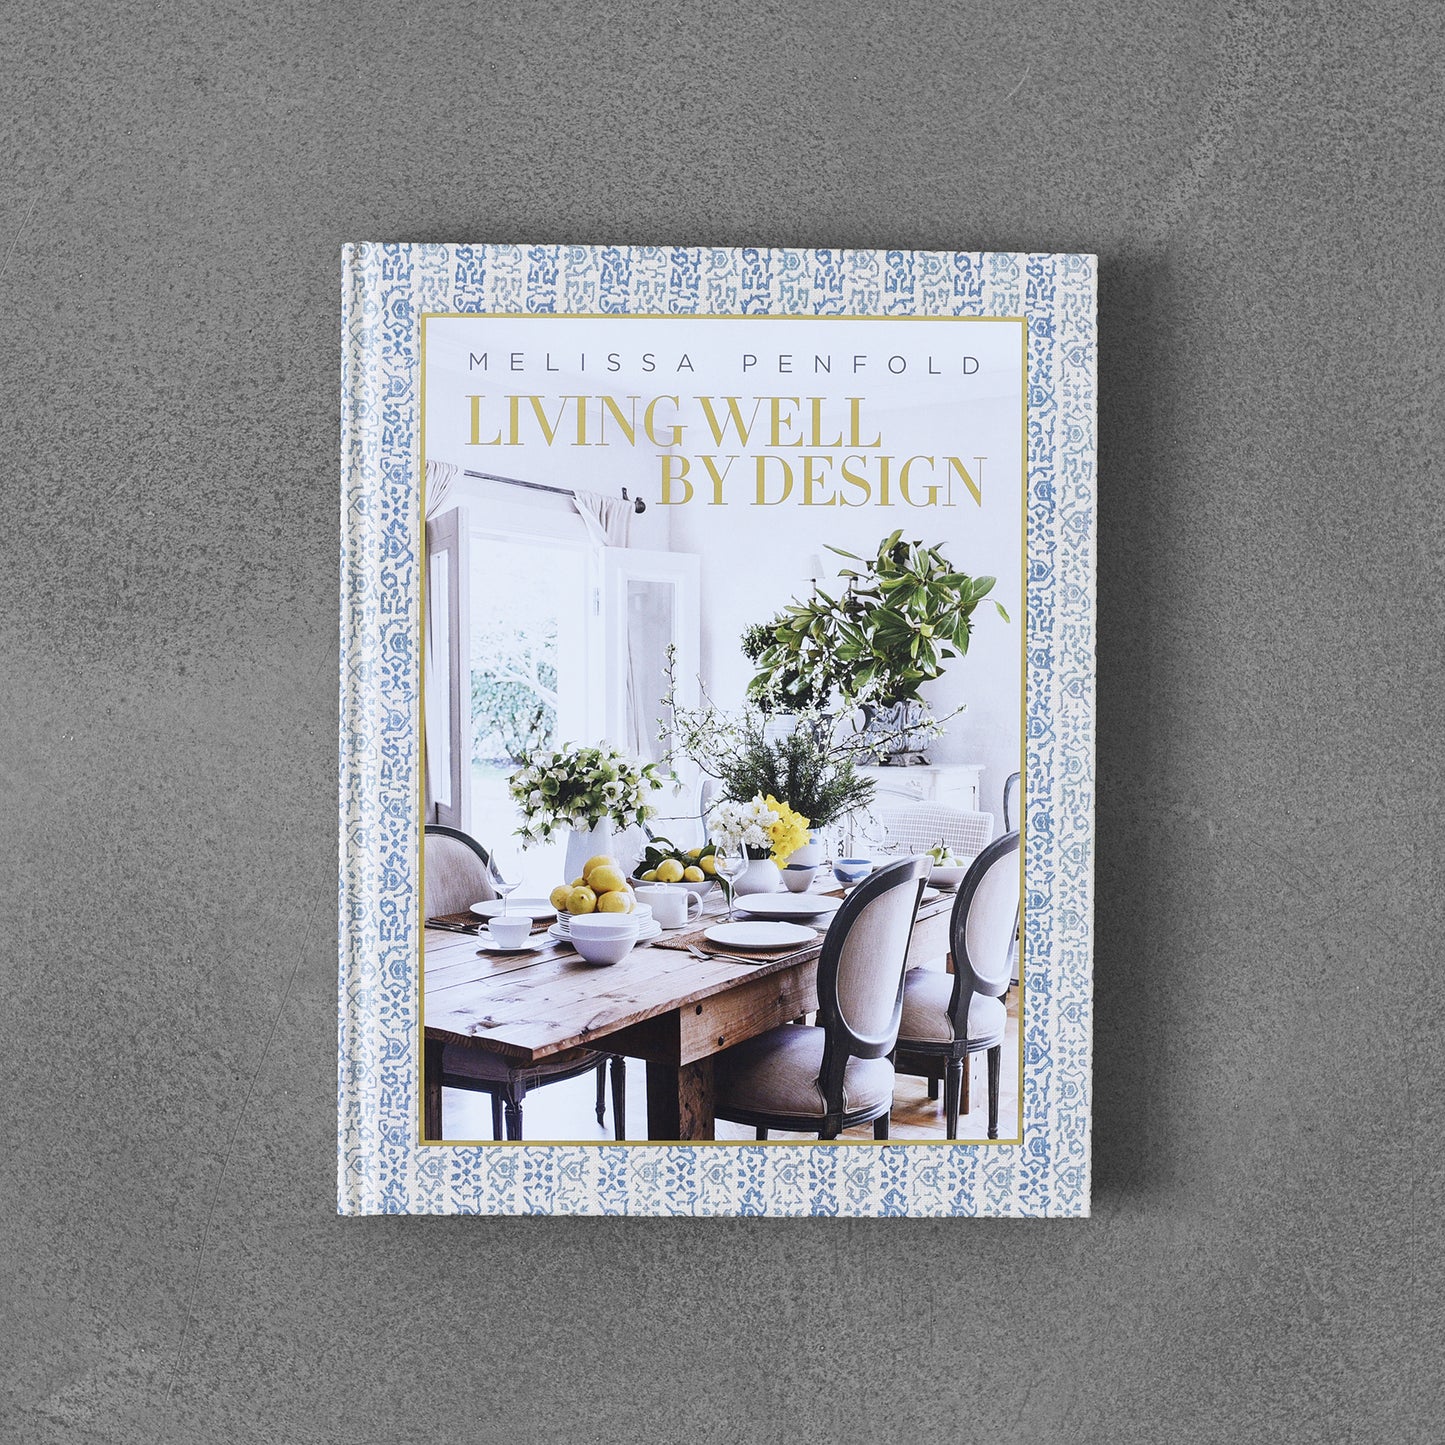 Living Well by Design, Melissa Penfold